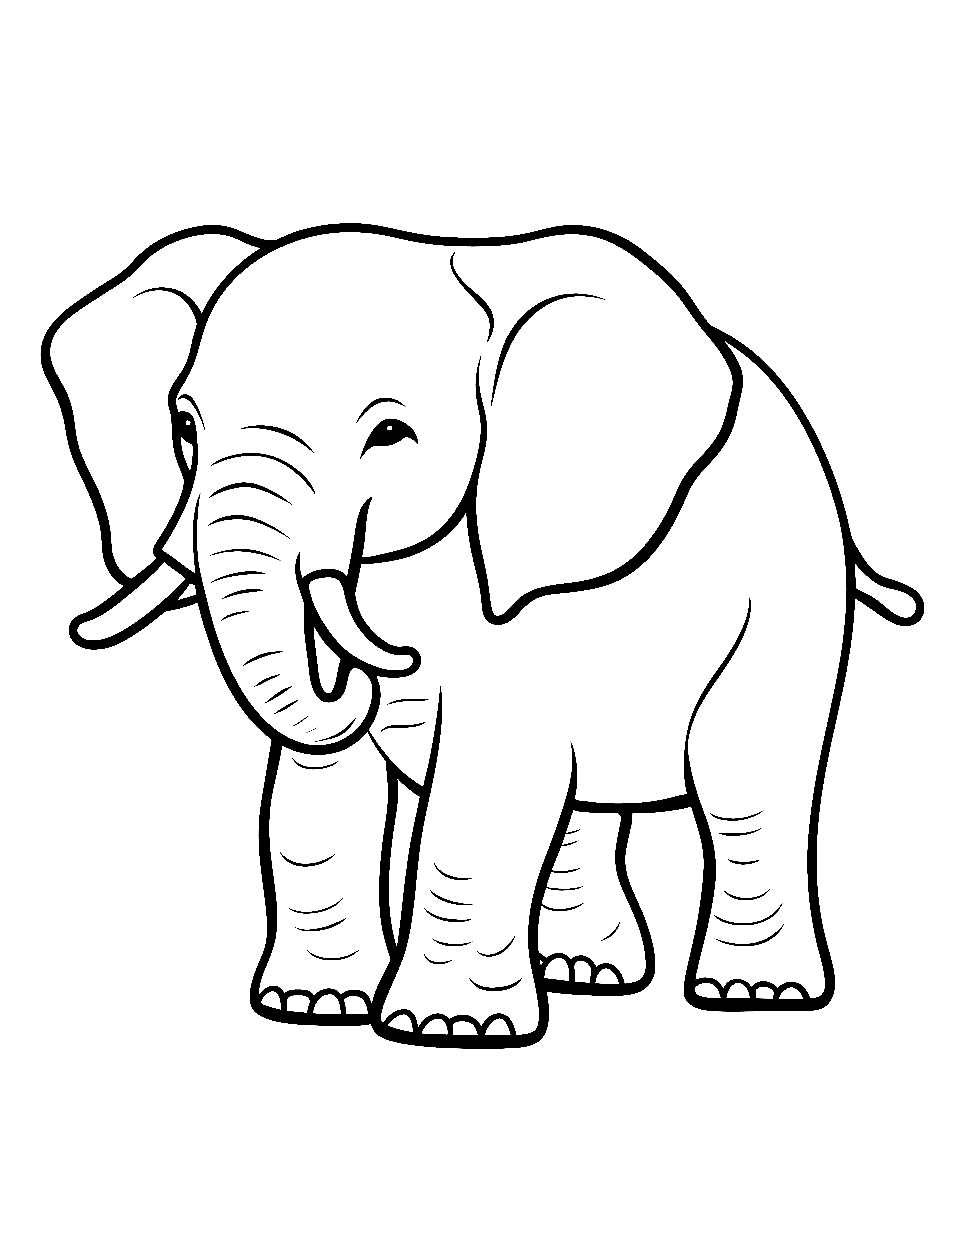 100 Colored Pencil Big Elephant Drawing Royalty-Free Photos and Stock  Images | Shutterstock